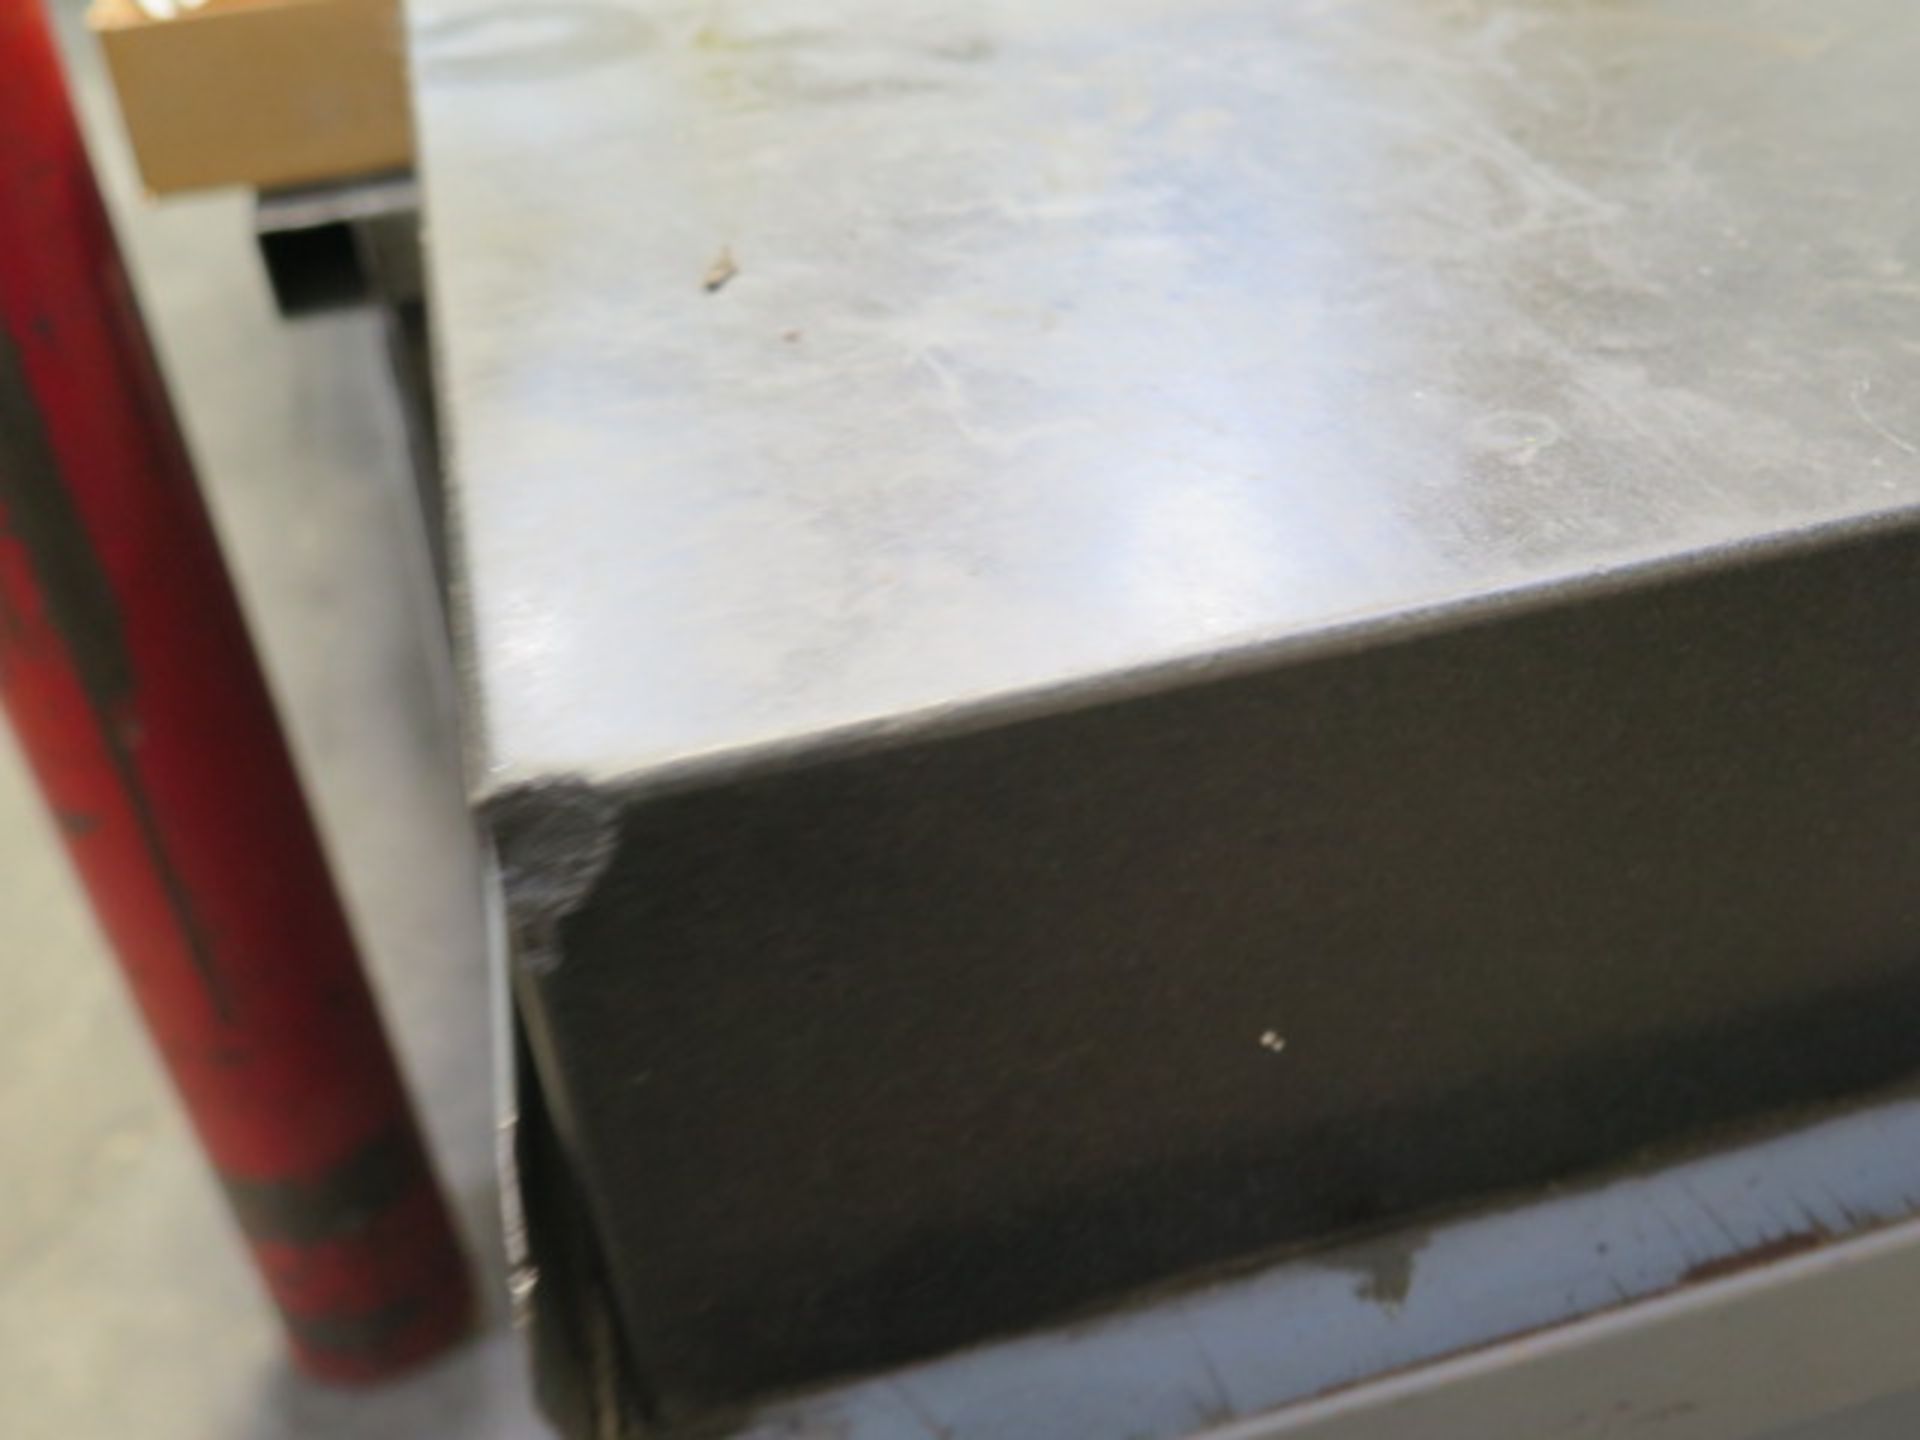 24" x 36" x 4" Granite Surface Plate w/ Cabinet Base (SOLD AS-IS - NO WARRANTY) - Image 5 of 7